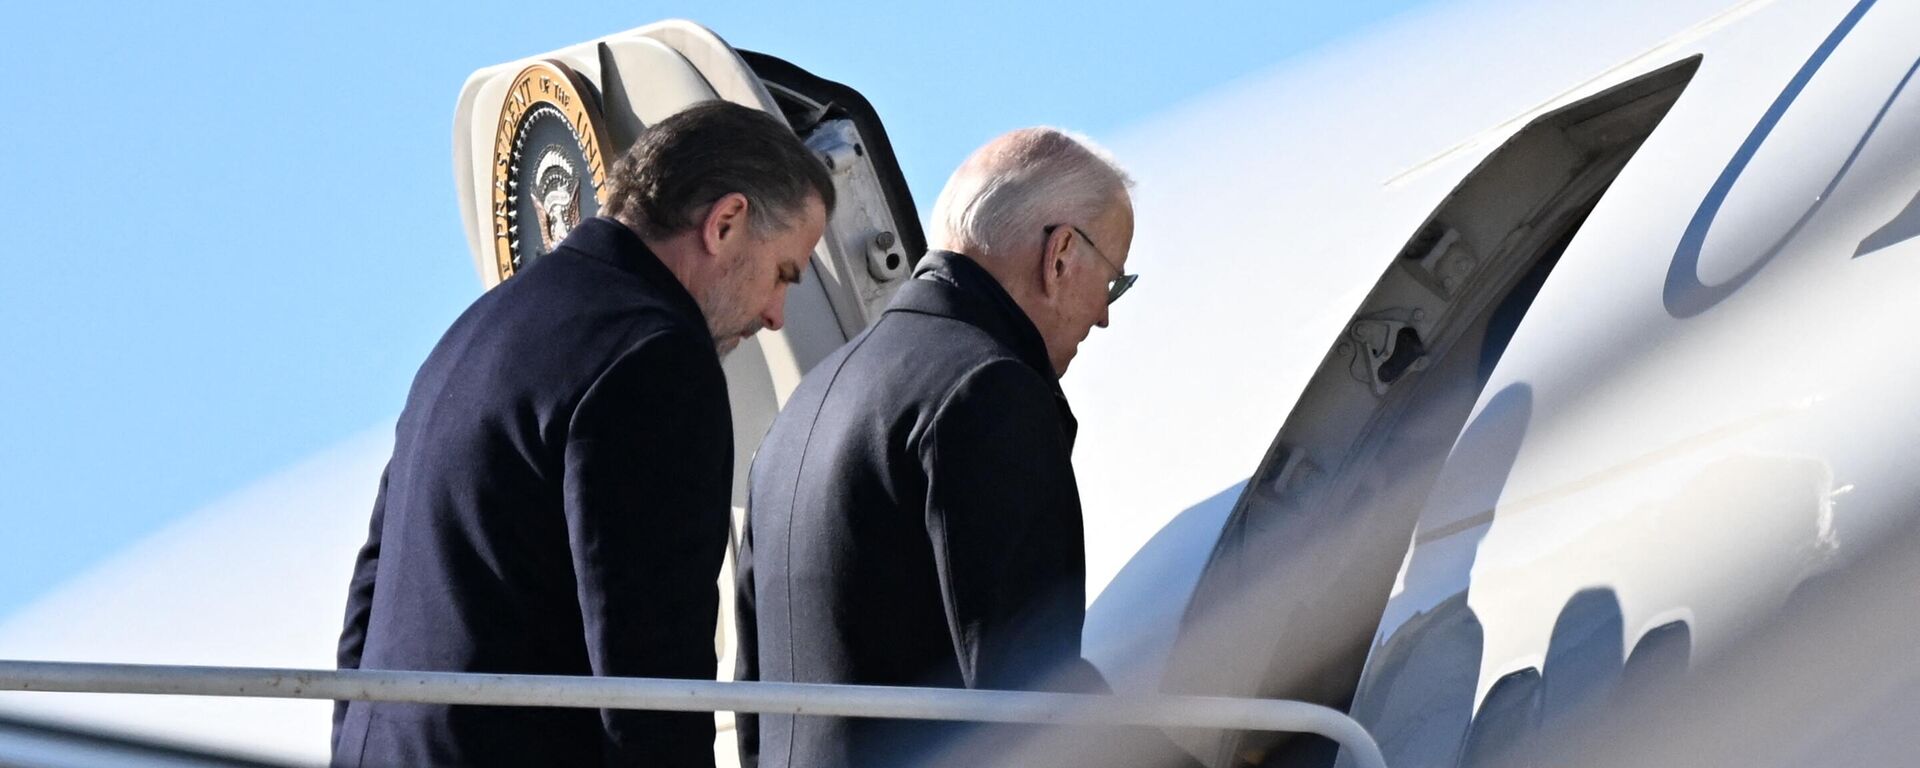 US President Joe Biden (R), with his son Hunter Biden, boards Air Force One as he departs from Delaware Air National Guard base in New Castle, Delaware, on February 4, 2023 - Sputnik International, 1920, 15.03.2023